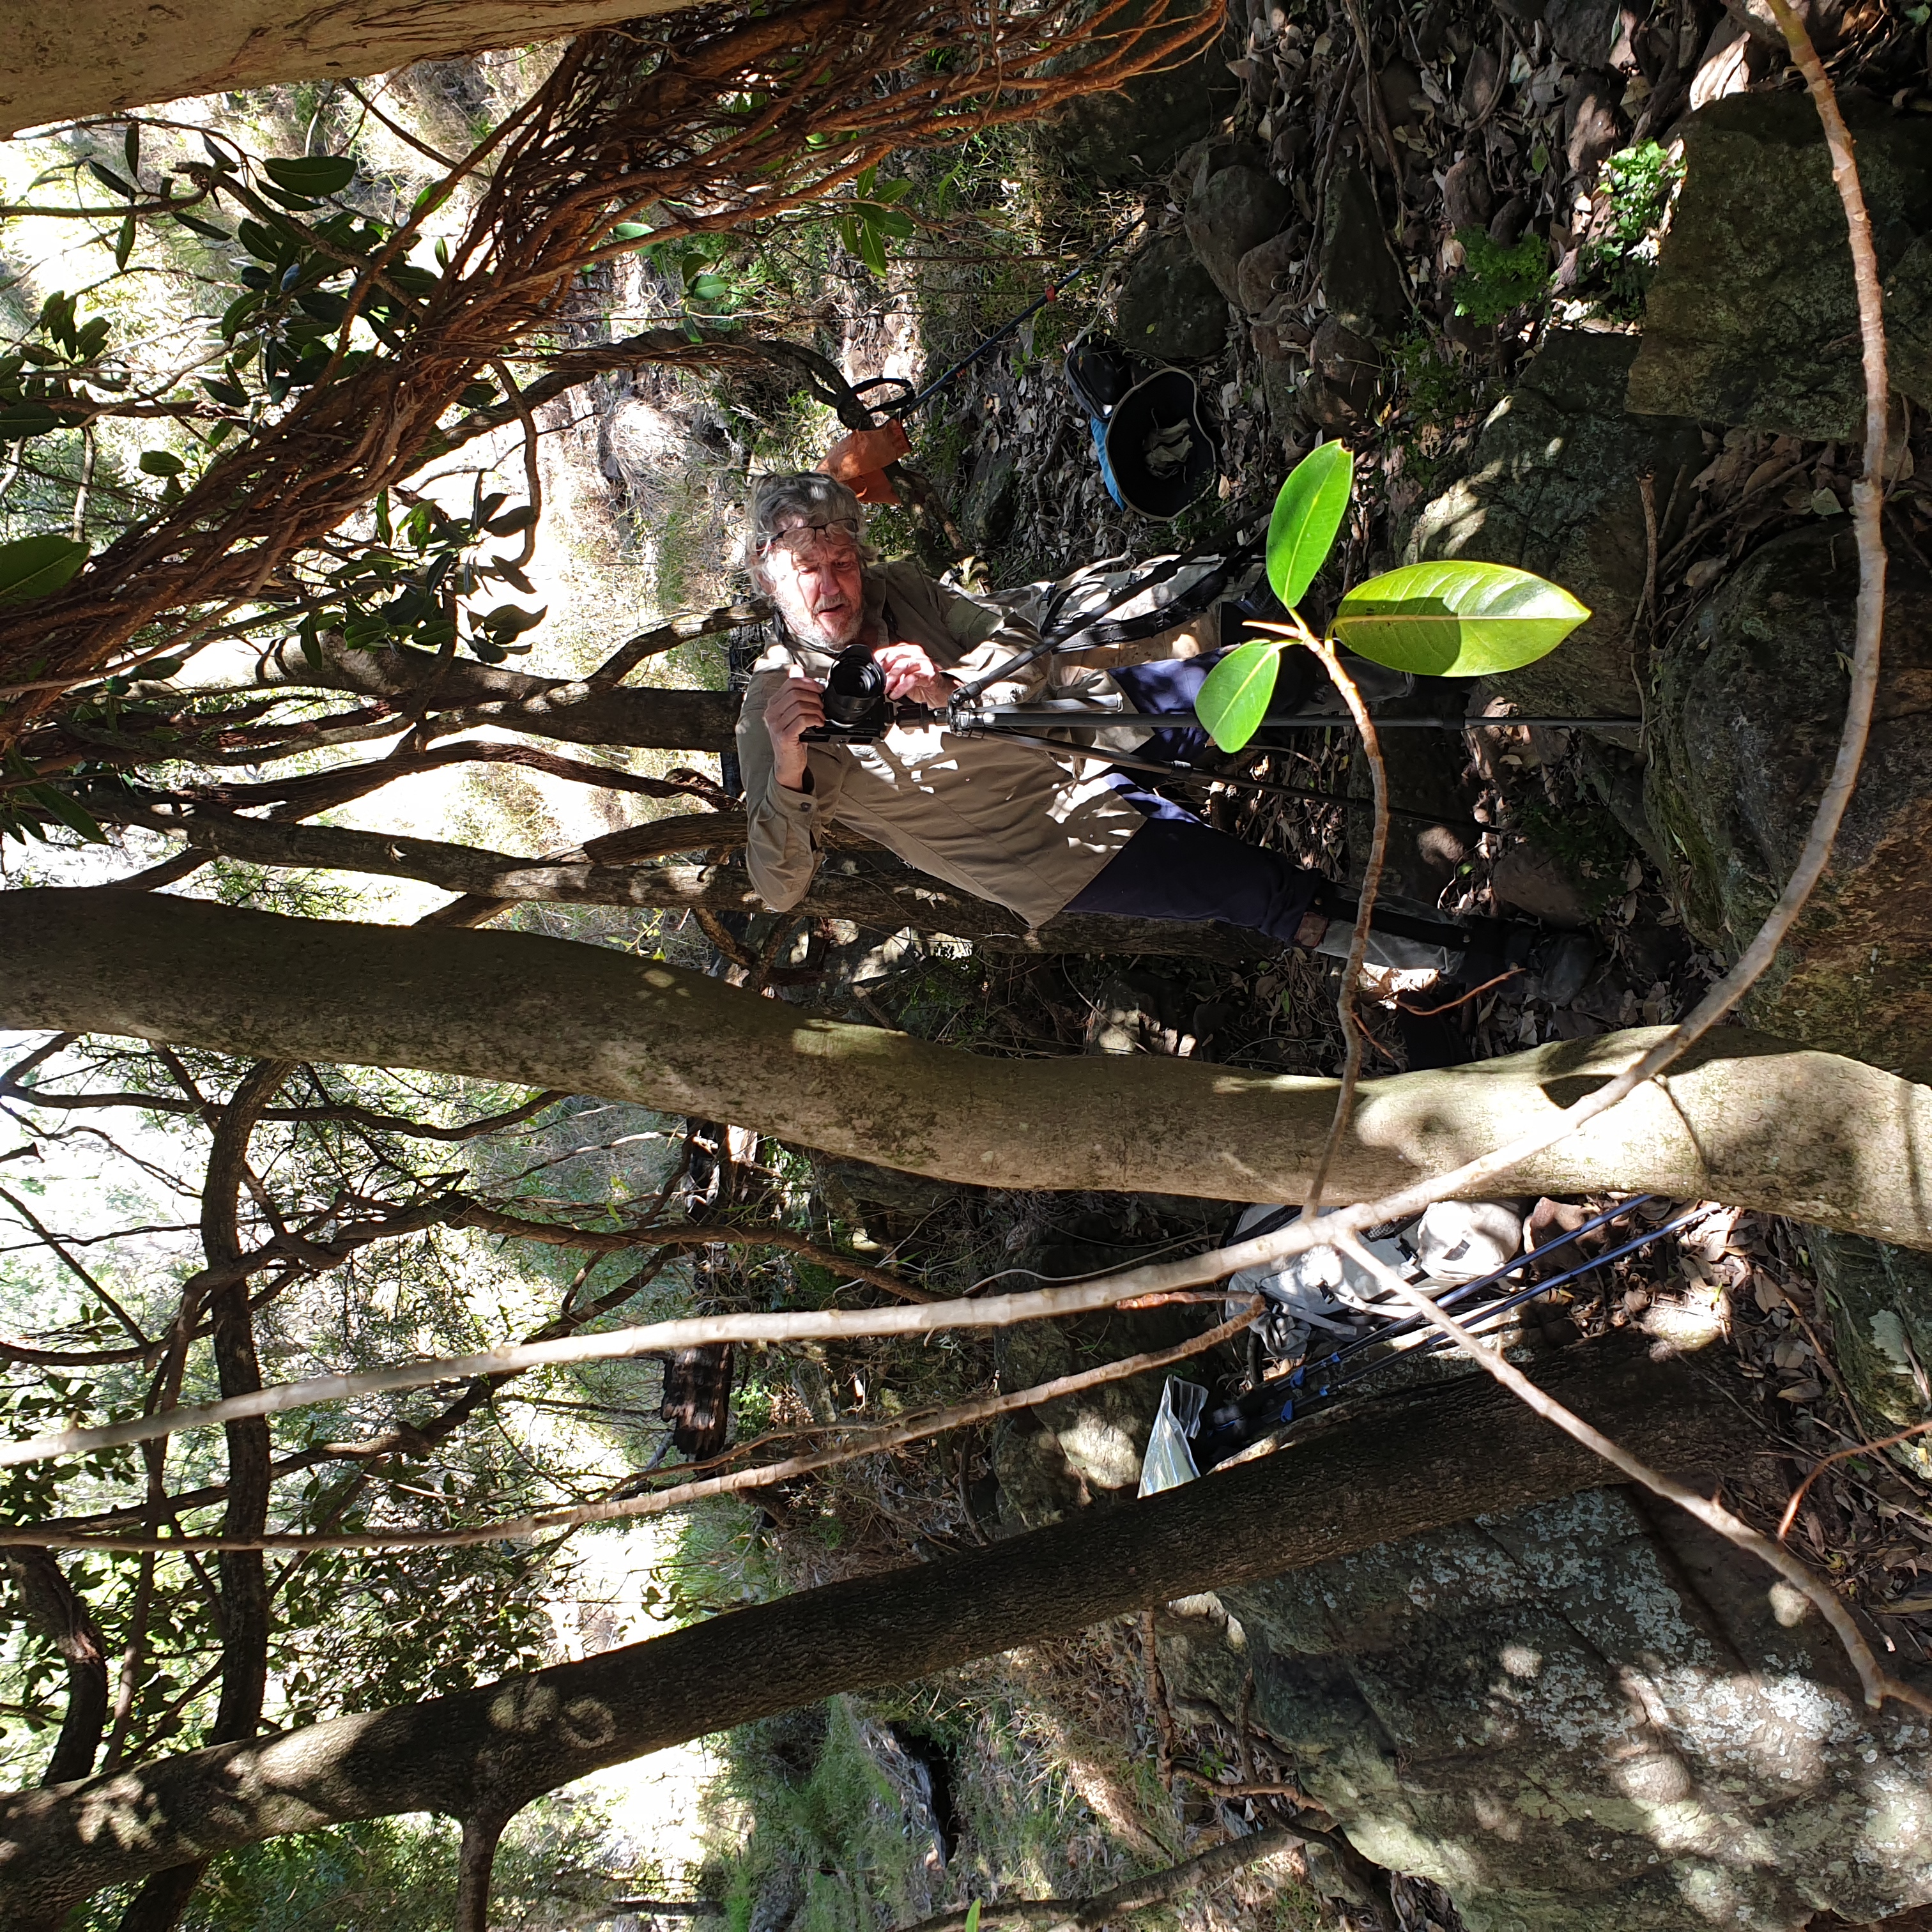 Ian sets up for a rainforest shot in Waa Gorge